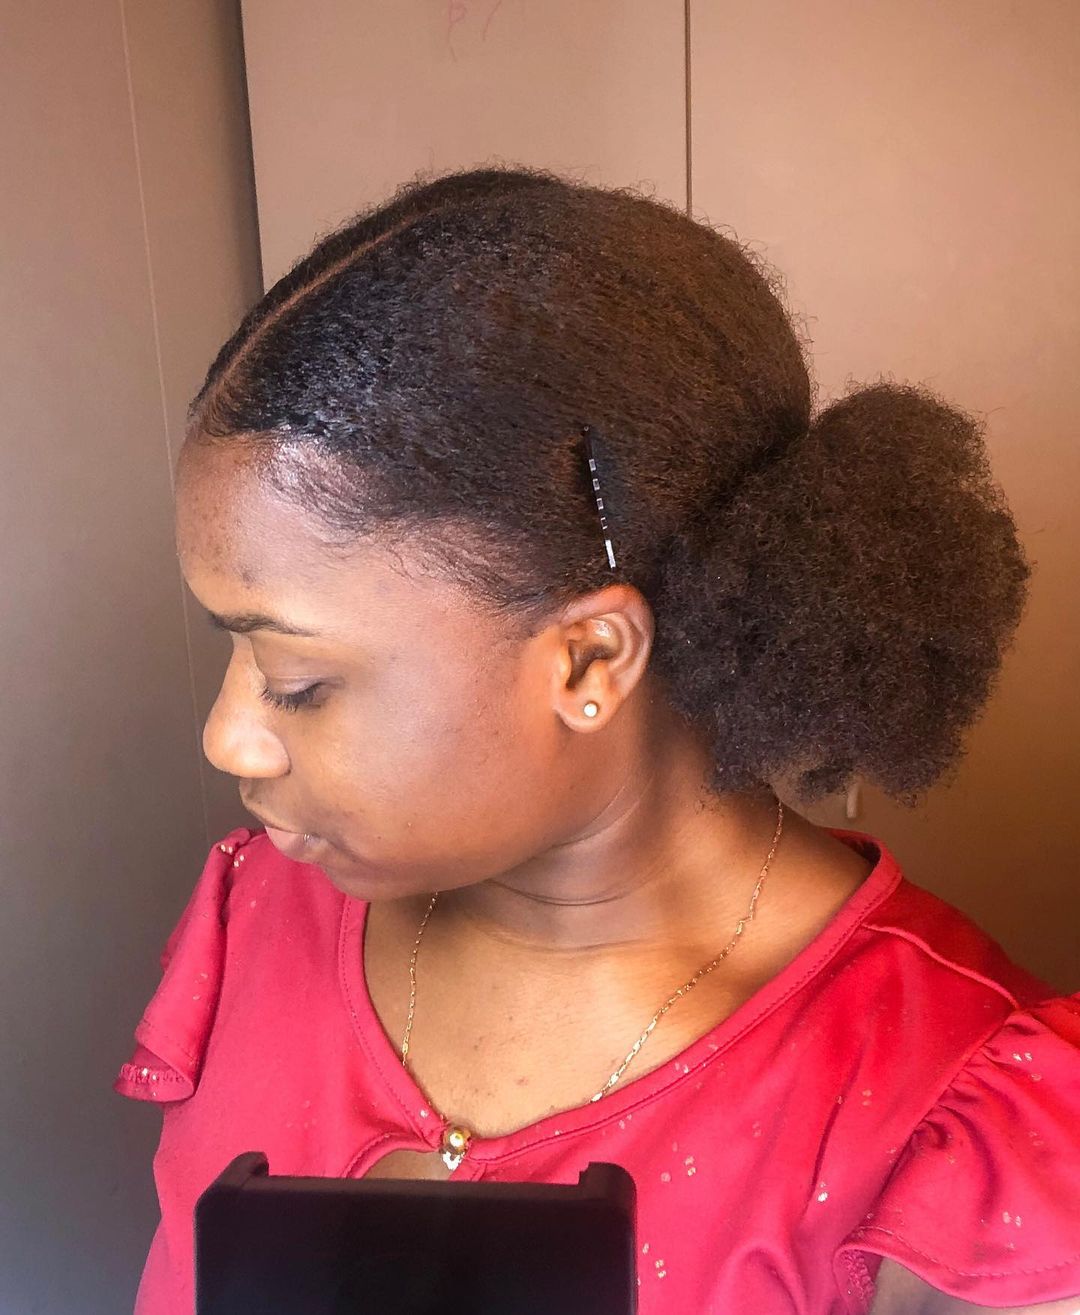 Updo Hairstyle for Black women 37 Black hair updo styles pictures | Black updo hairstyles with curls | black woman braids Updo Hairstyles for Black Women